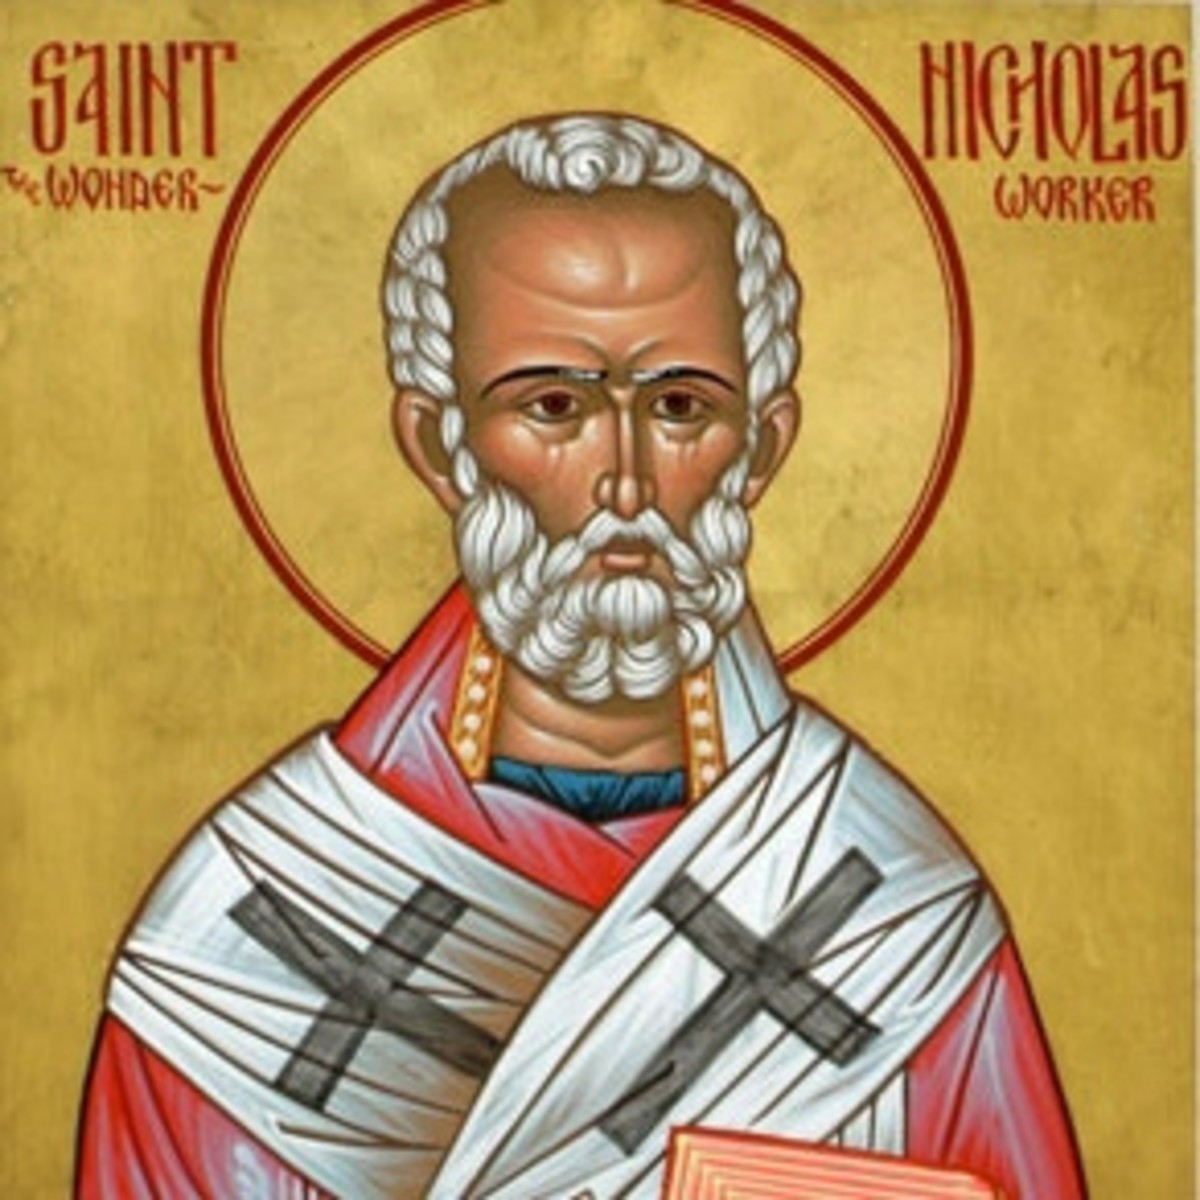 For all of these reasons Nicholas was canonised after dying and was associated with helping sailors, children and giving gifts without expecting praise. This is the first true Saint Nicholas 12/